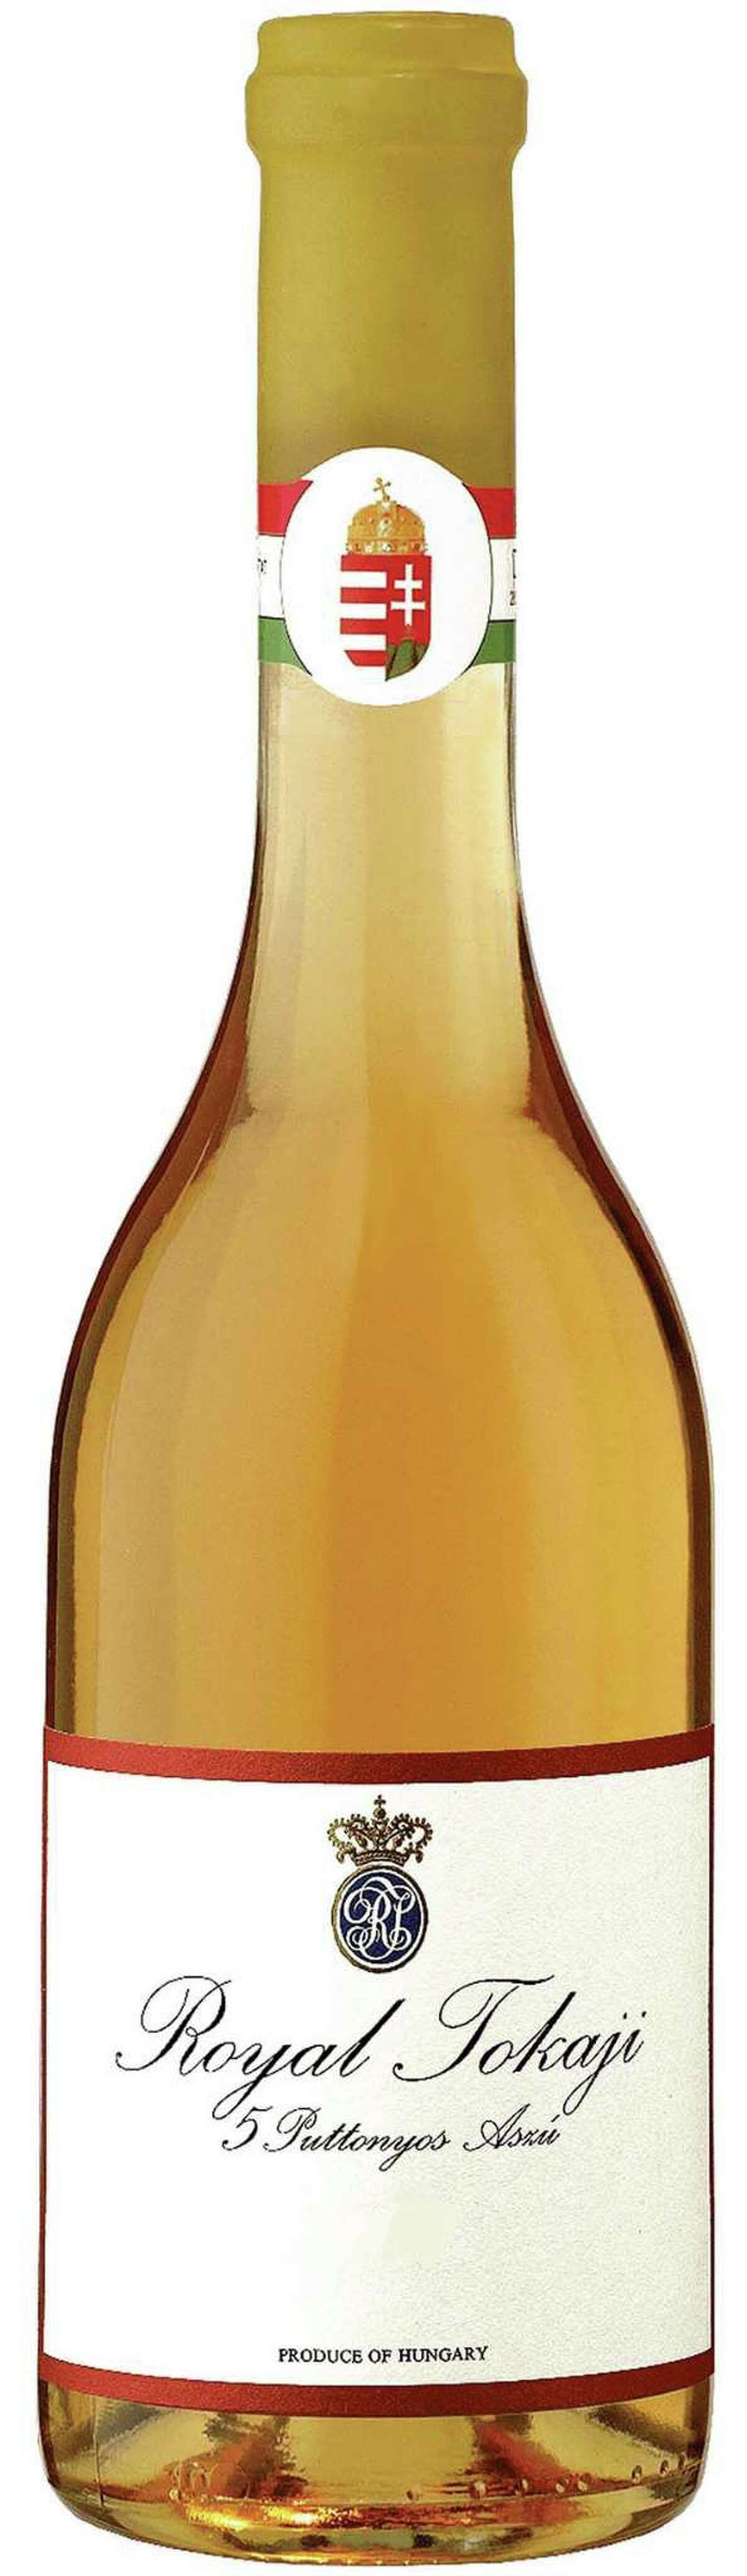 The Royal Tokaji 5 Puttonyos Aszú 2013 could be a holiday dessert all on its own. And at $55 a bottle, you’ll probably want to keep the portions small.